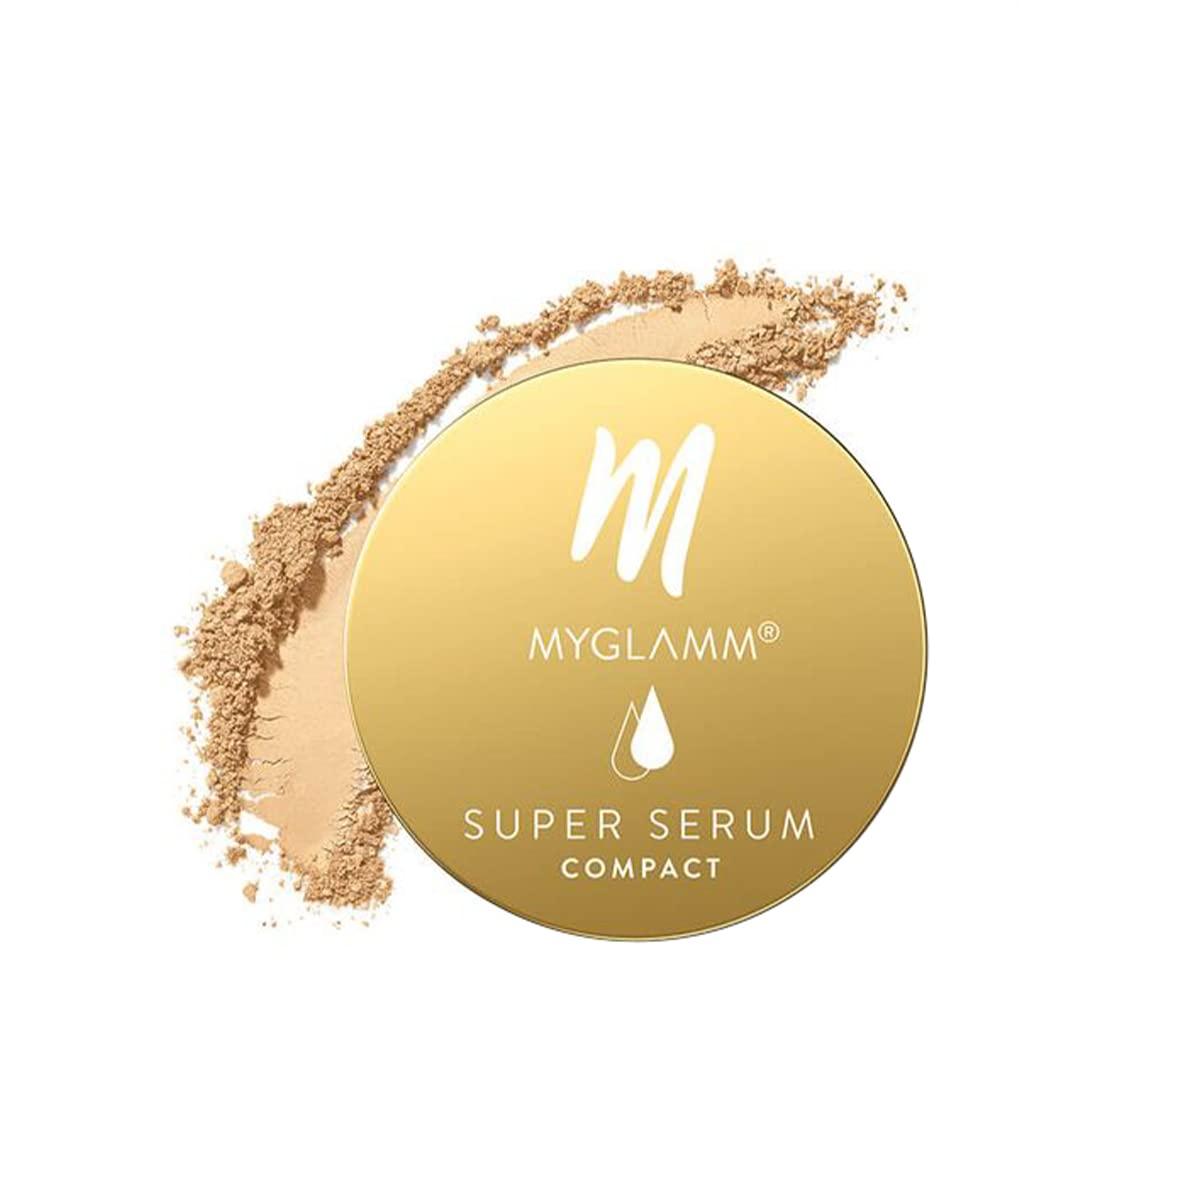 myglamm super serum compact - 102w beige, 9g | infused with hyaluronic acid & vitamin e | matte finish compact powder | all skin types